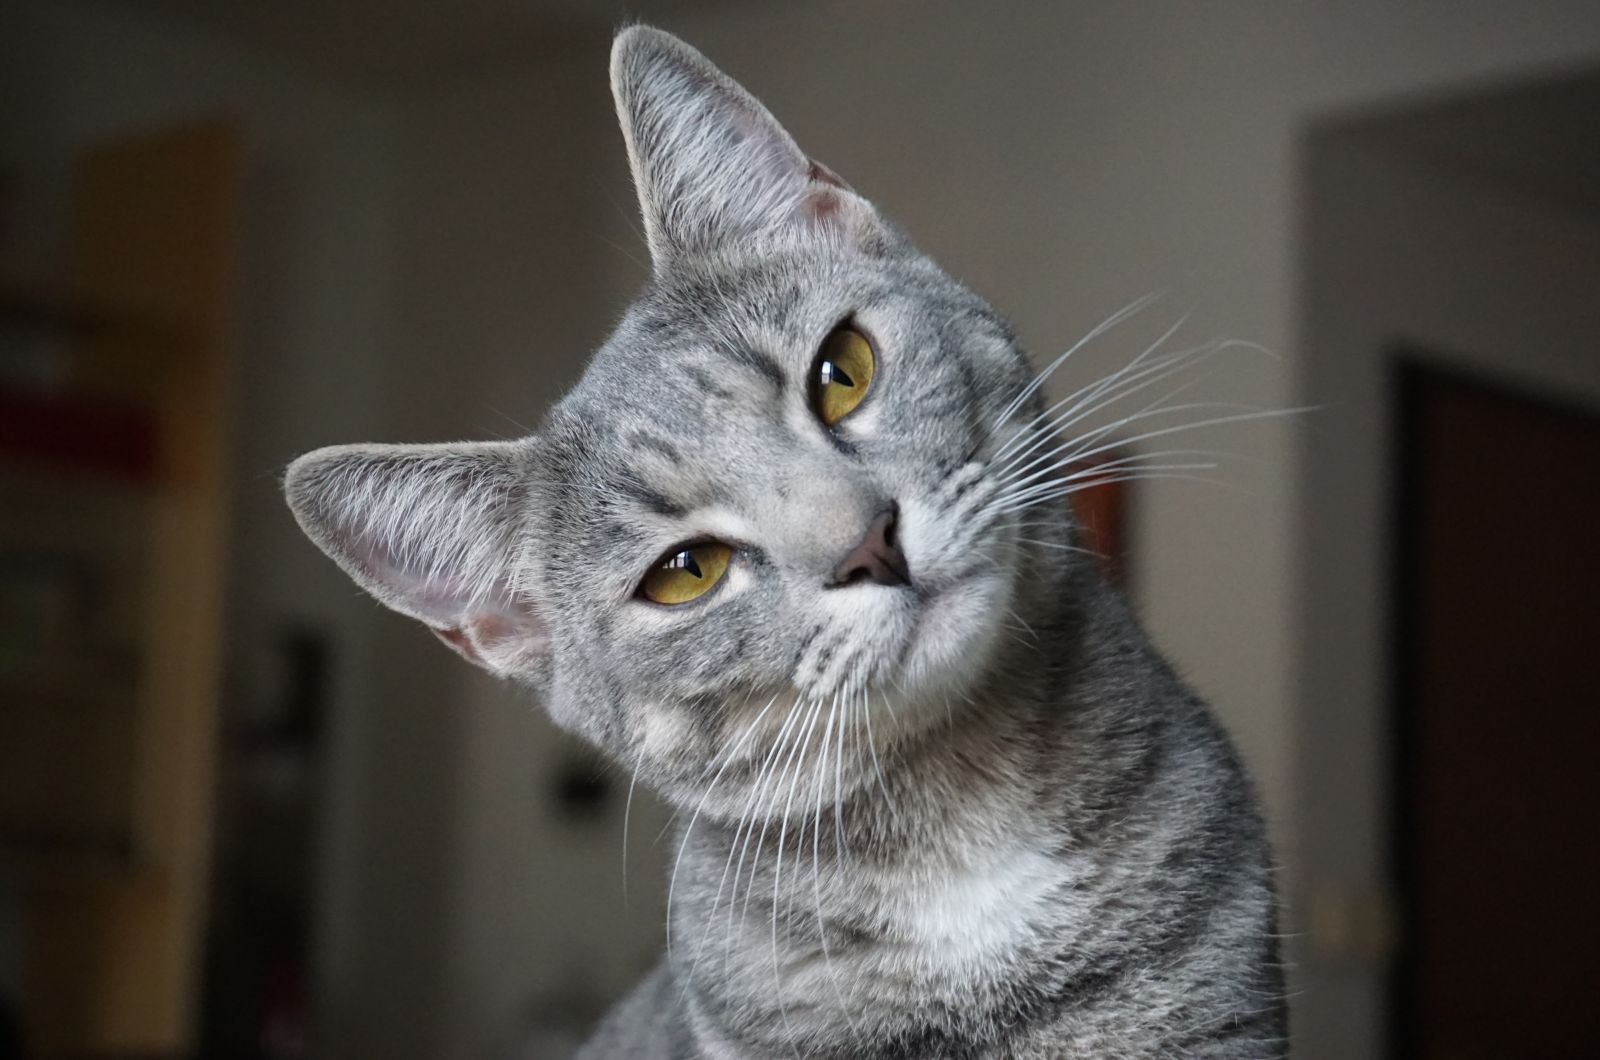 close-up photo of a gray cat